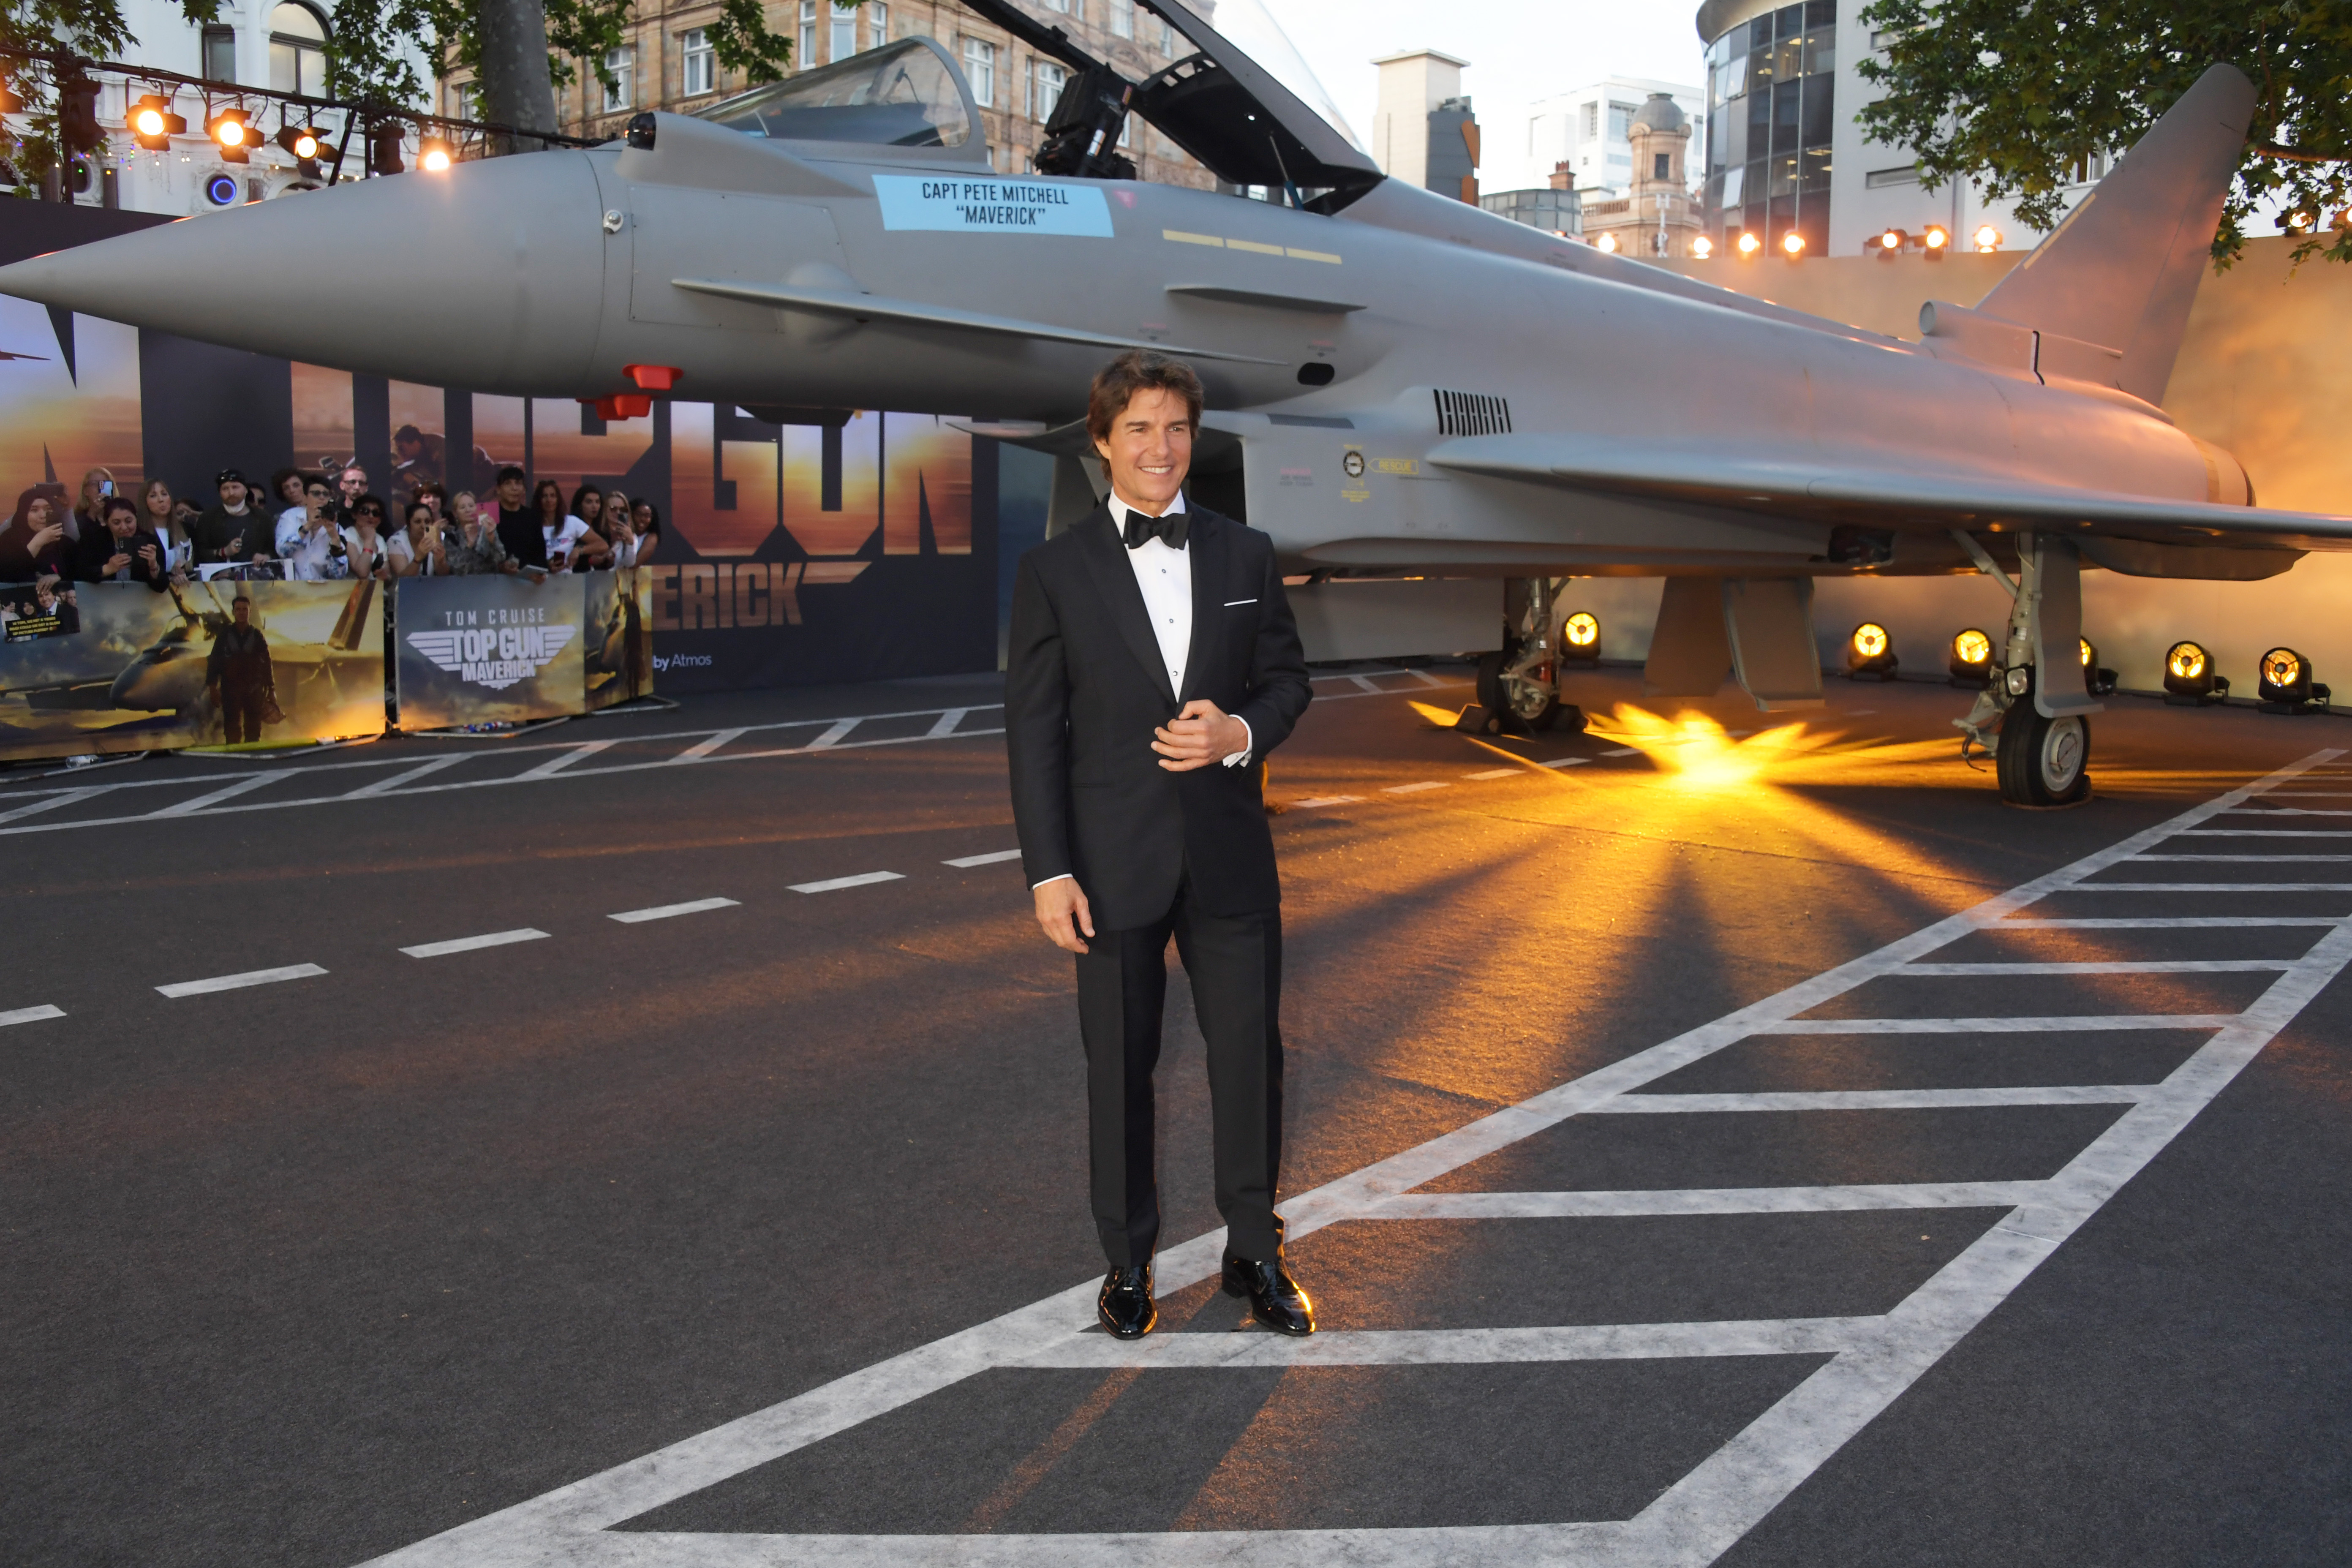 Tom Cruise at the Royal Film Performance screening of "Top Gun: Maverick" in Leicester Square on May 19, 2022 in London, England | Source: Getty Images